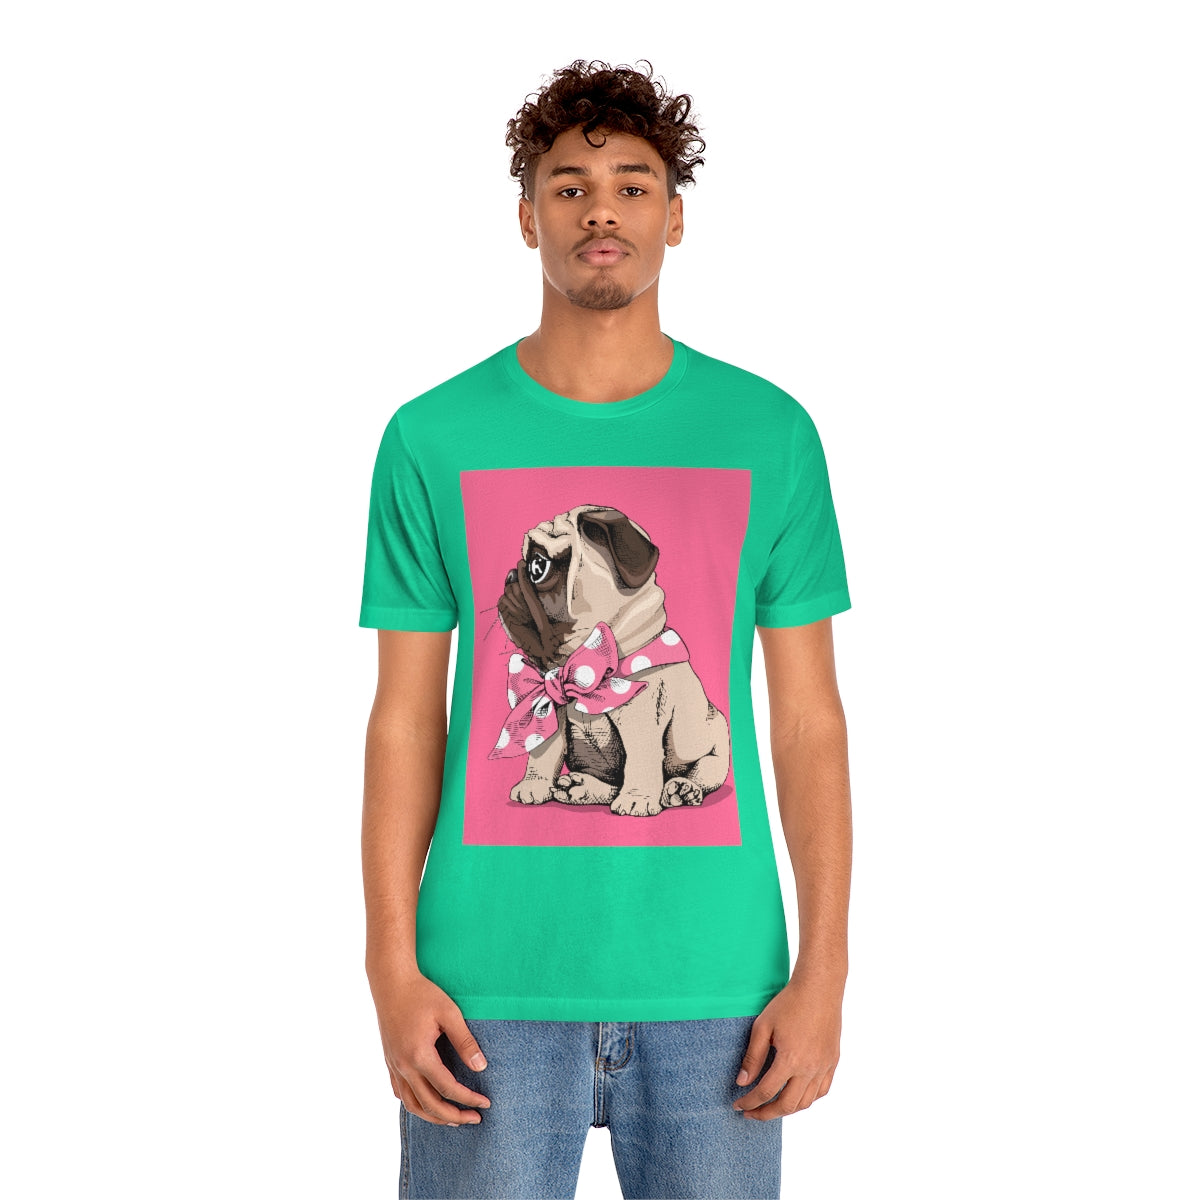 Unisex Jersey Short Sleeve Tee "Puppy Pug with a bow tie"